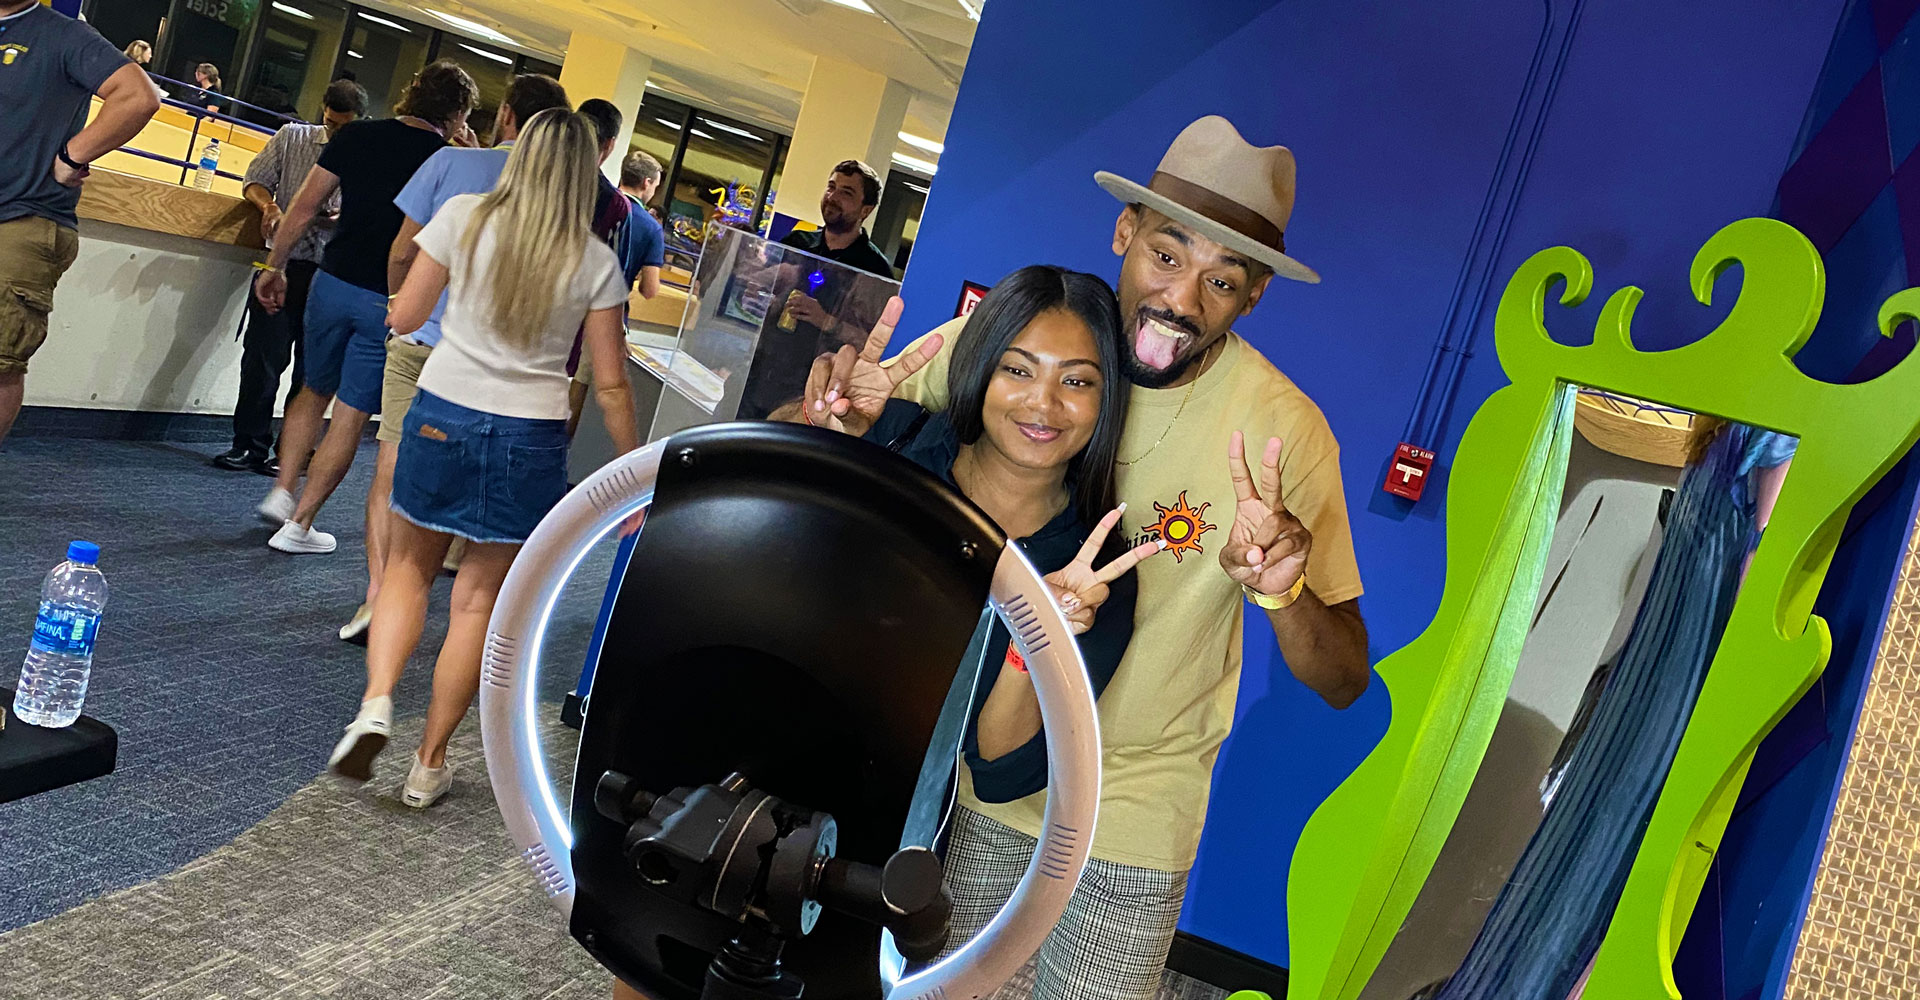 Woman wearing Silent Disco headphones and a man wearing a baseball cap, smiling and posing for a selfie in front of a T. rex inside Dinosphere.